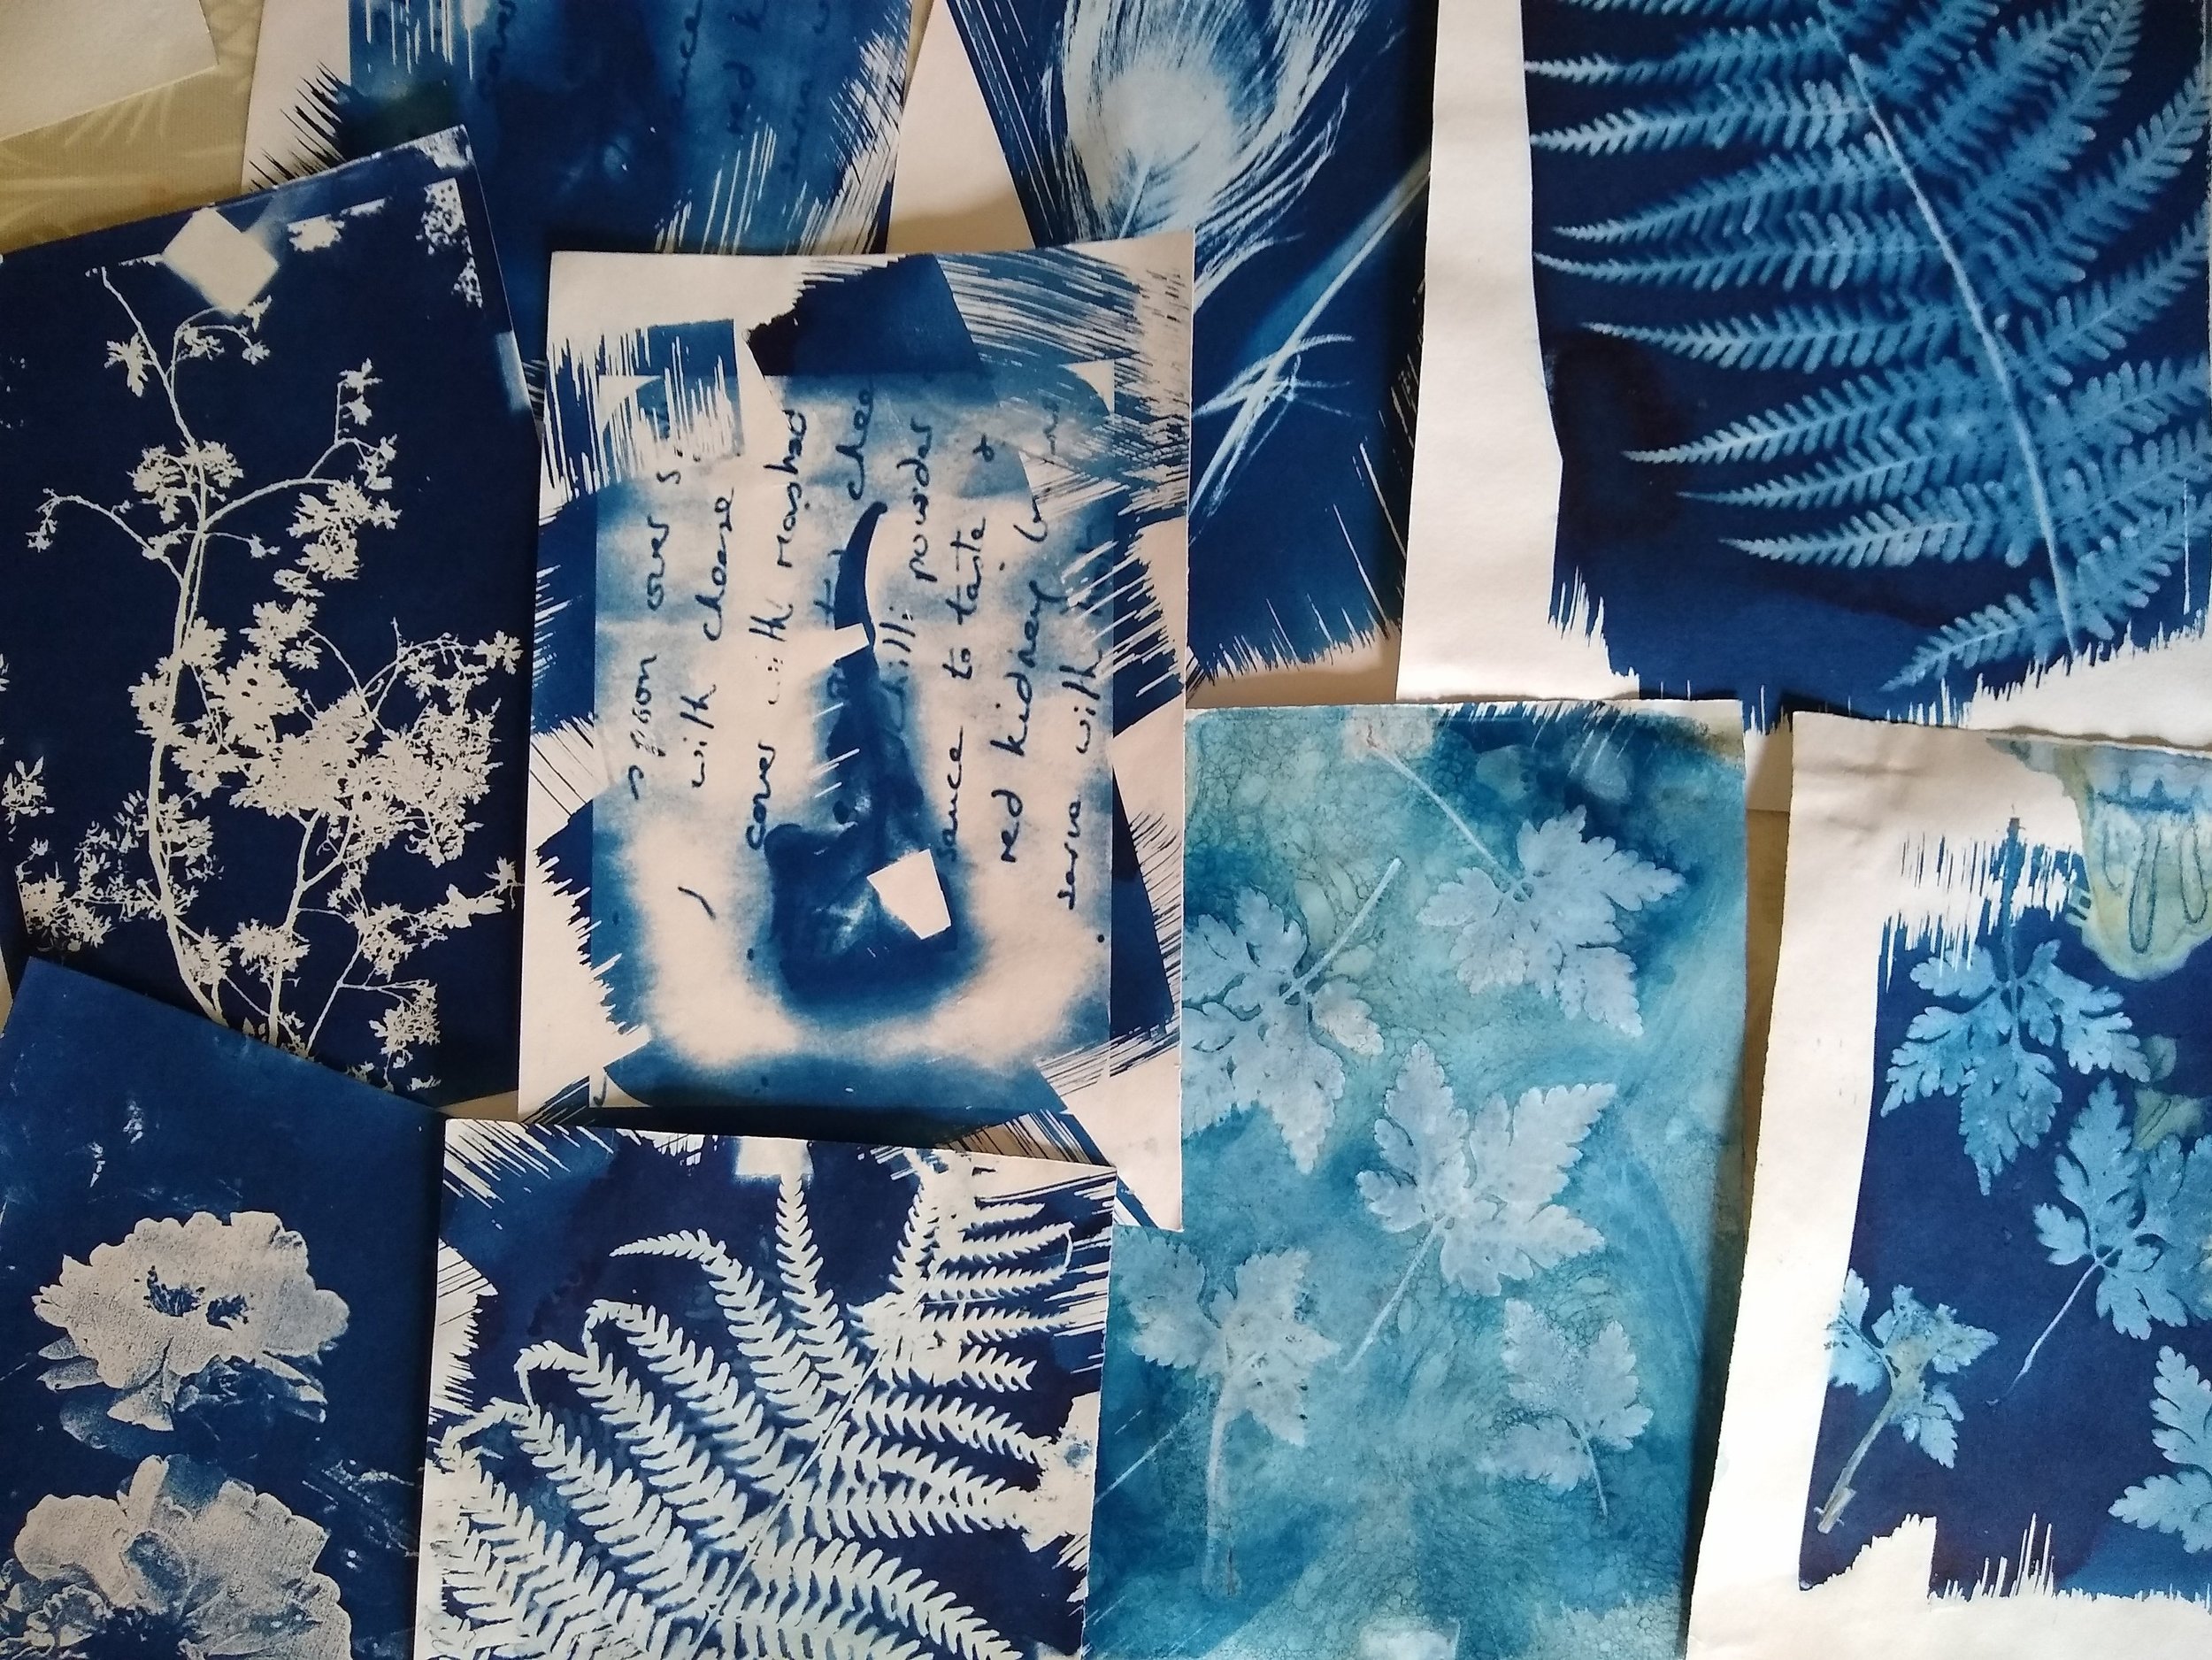 5 simple steps for getting started with Cyanotype printing — Kate Watkins